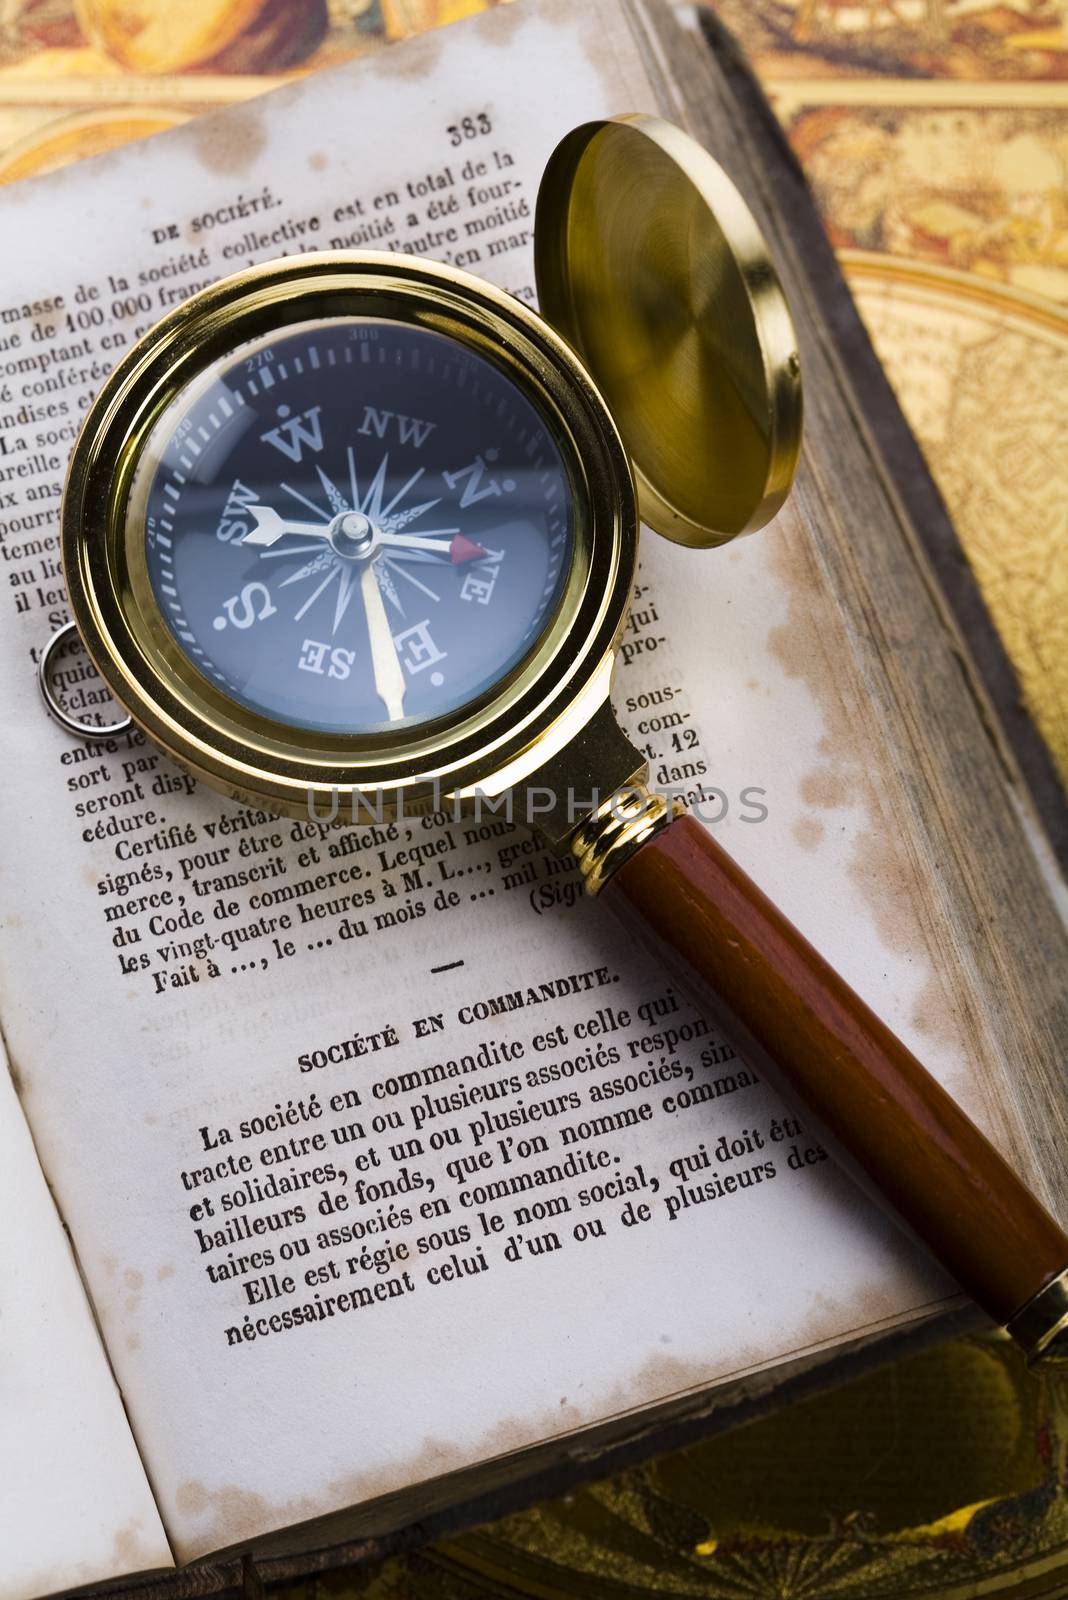 Traveling, magnifying glass and globe, ambient light travel theme by JanPietruszka